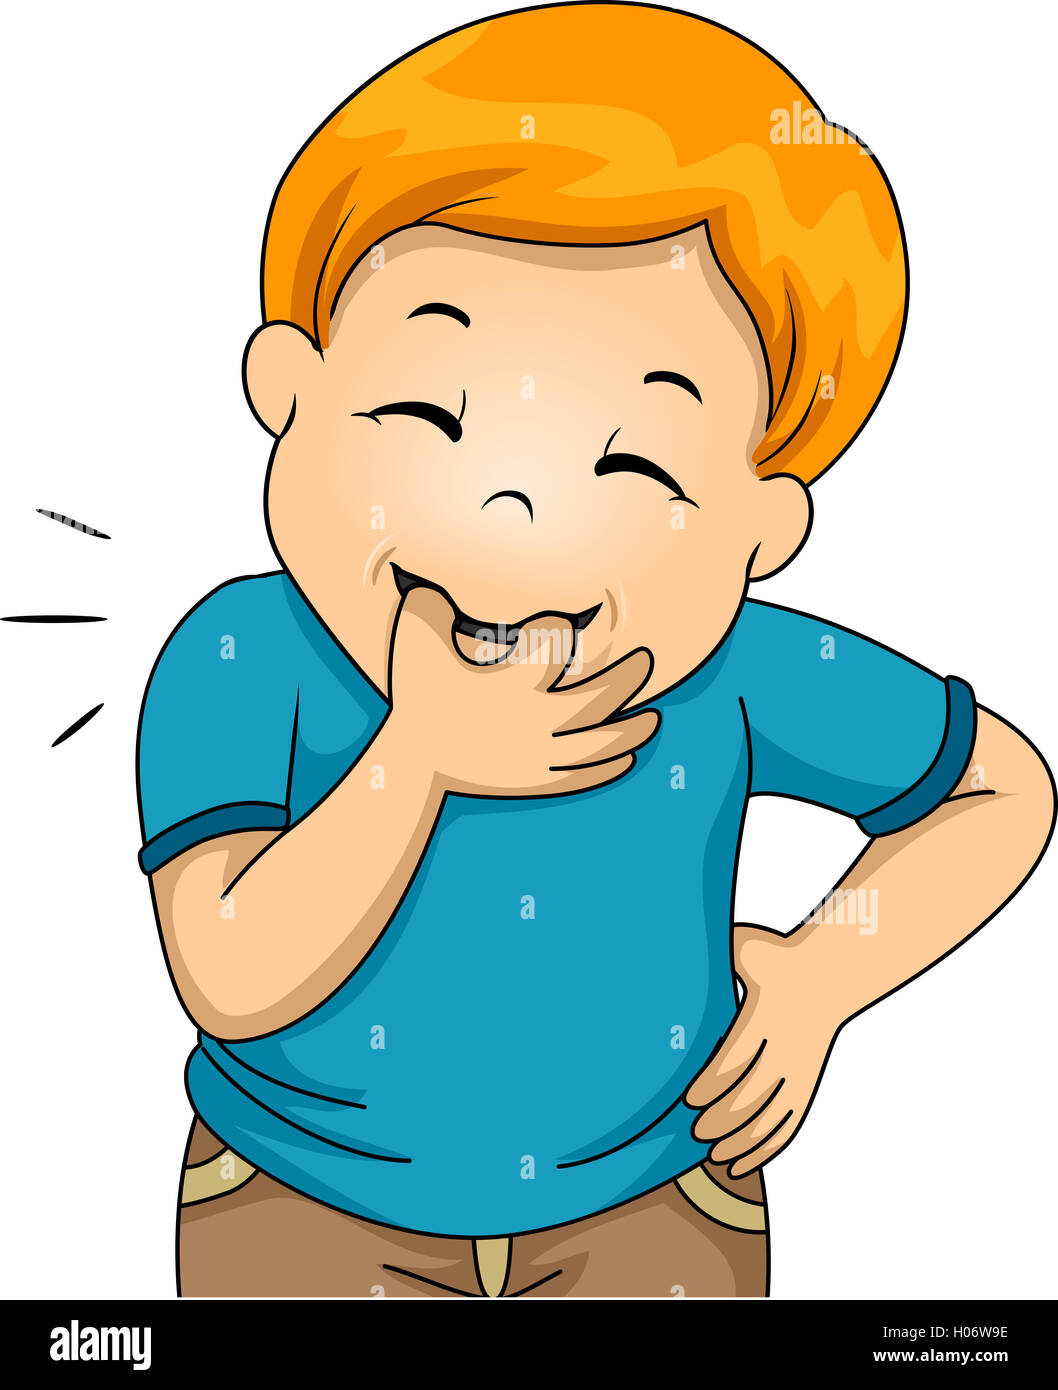 Illustration of a Little Boy Whistling Using His Fingers Stock Photo